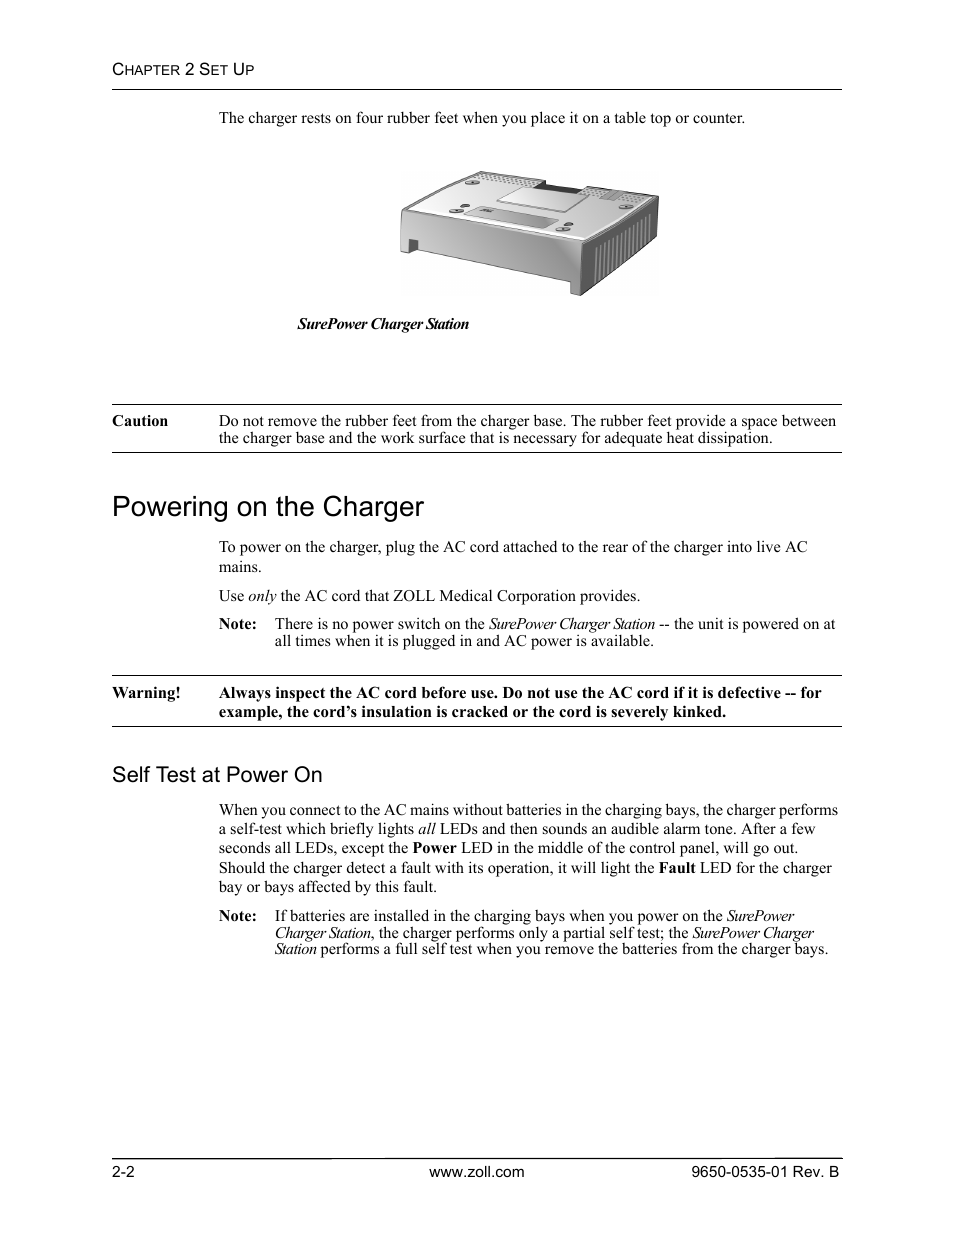 Powering on the charger, Self test at power on | ZOLL SurePower Rev B Charger Station User Manual | Page 20 / 44